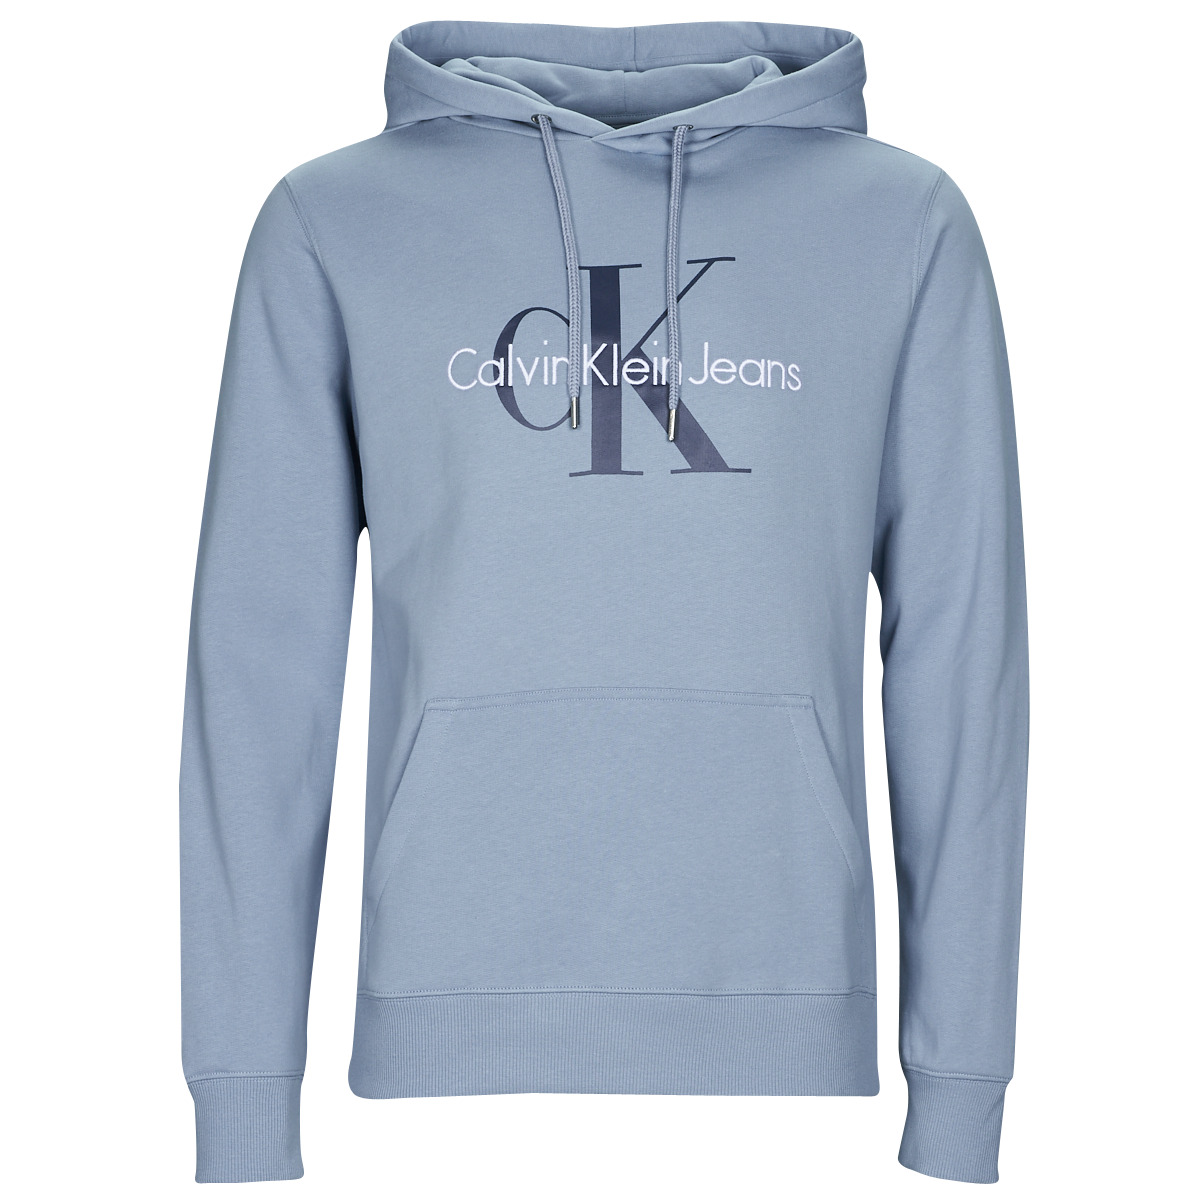 Calvin Klein Jeans MONOLOGO REGULAR HOODIE Blue - Free delivery | Spartoo  NET ! - Clothing sweaters Men